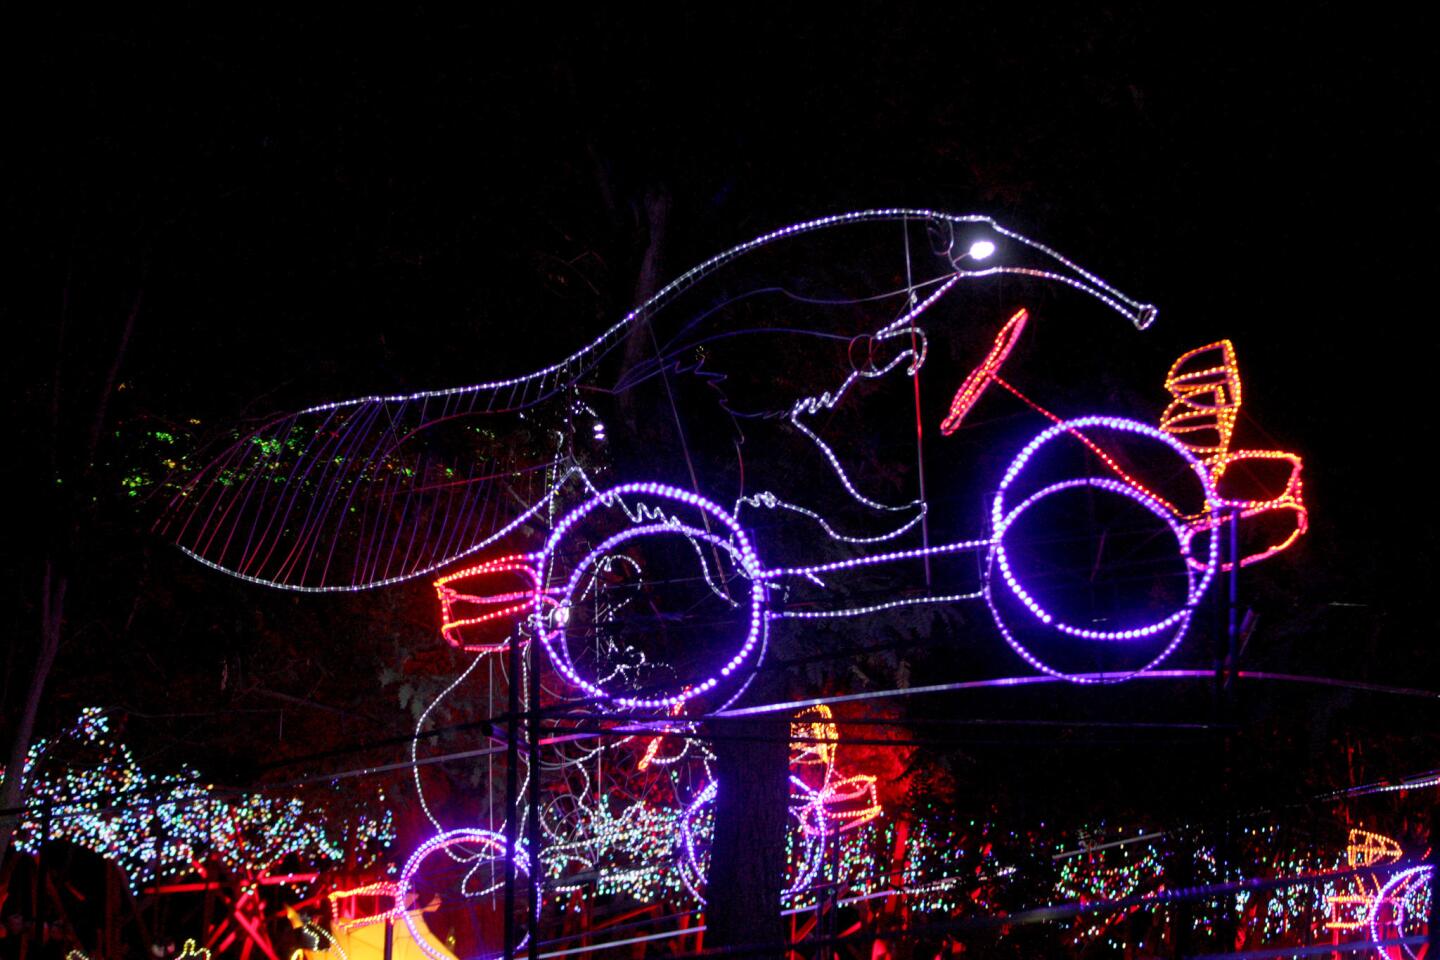 Photo Gallery: L.A. Zoo Lights